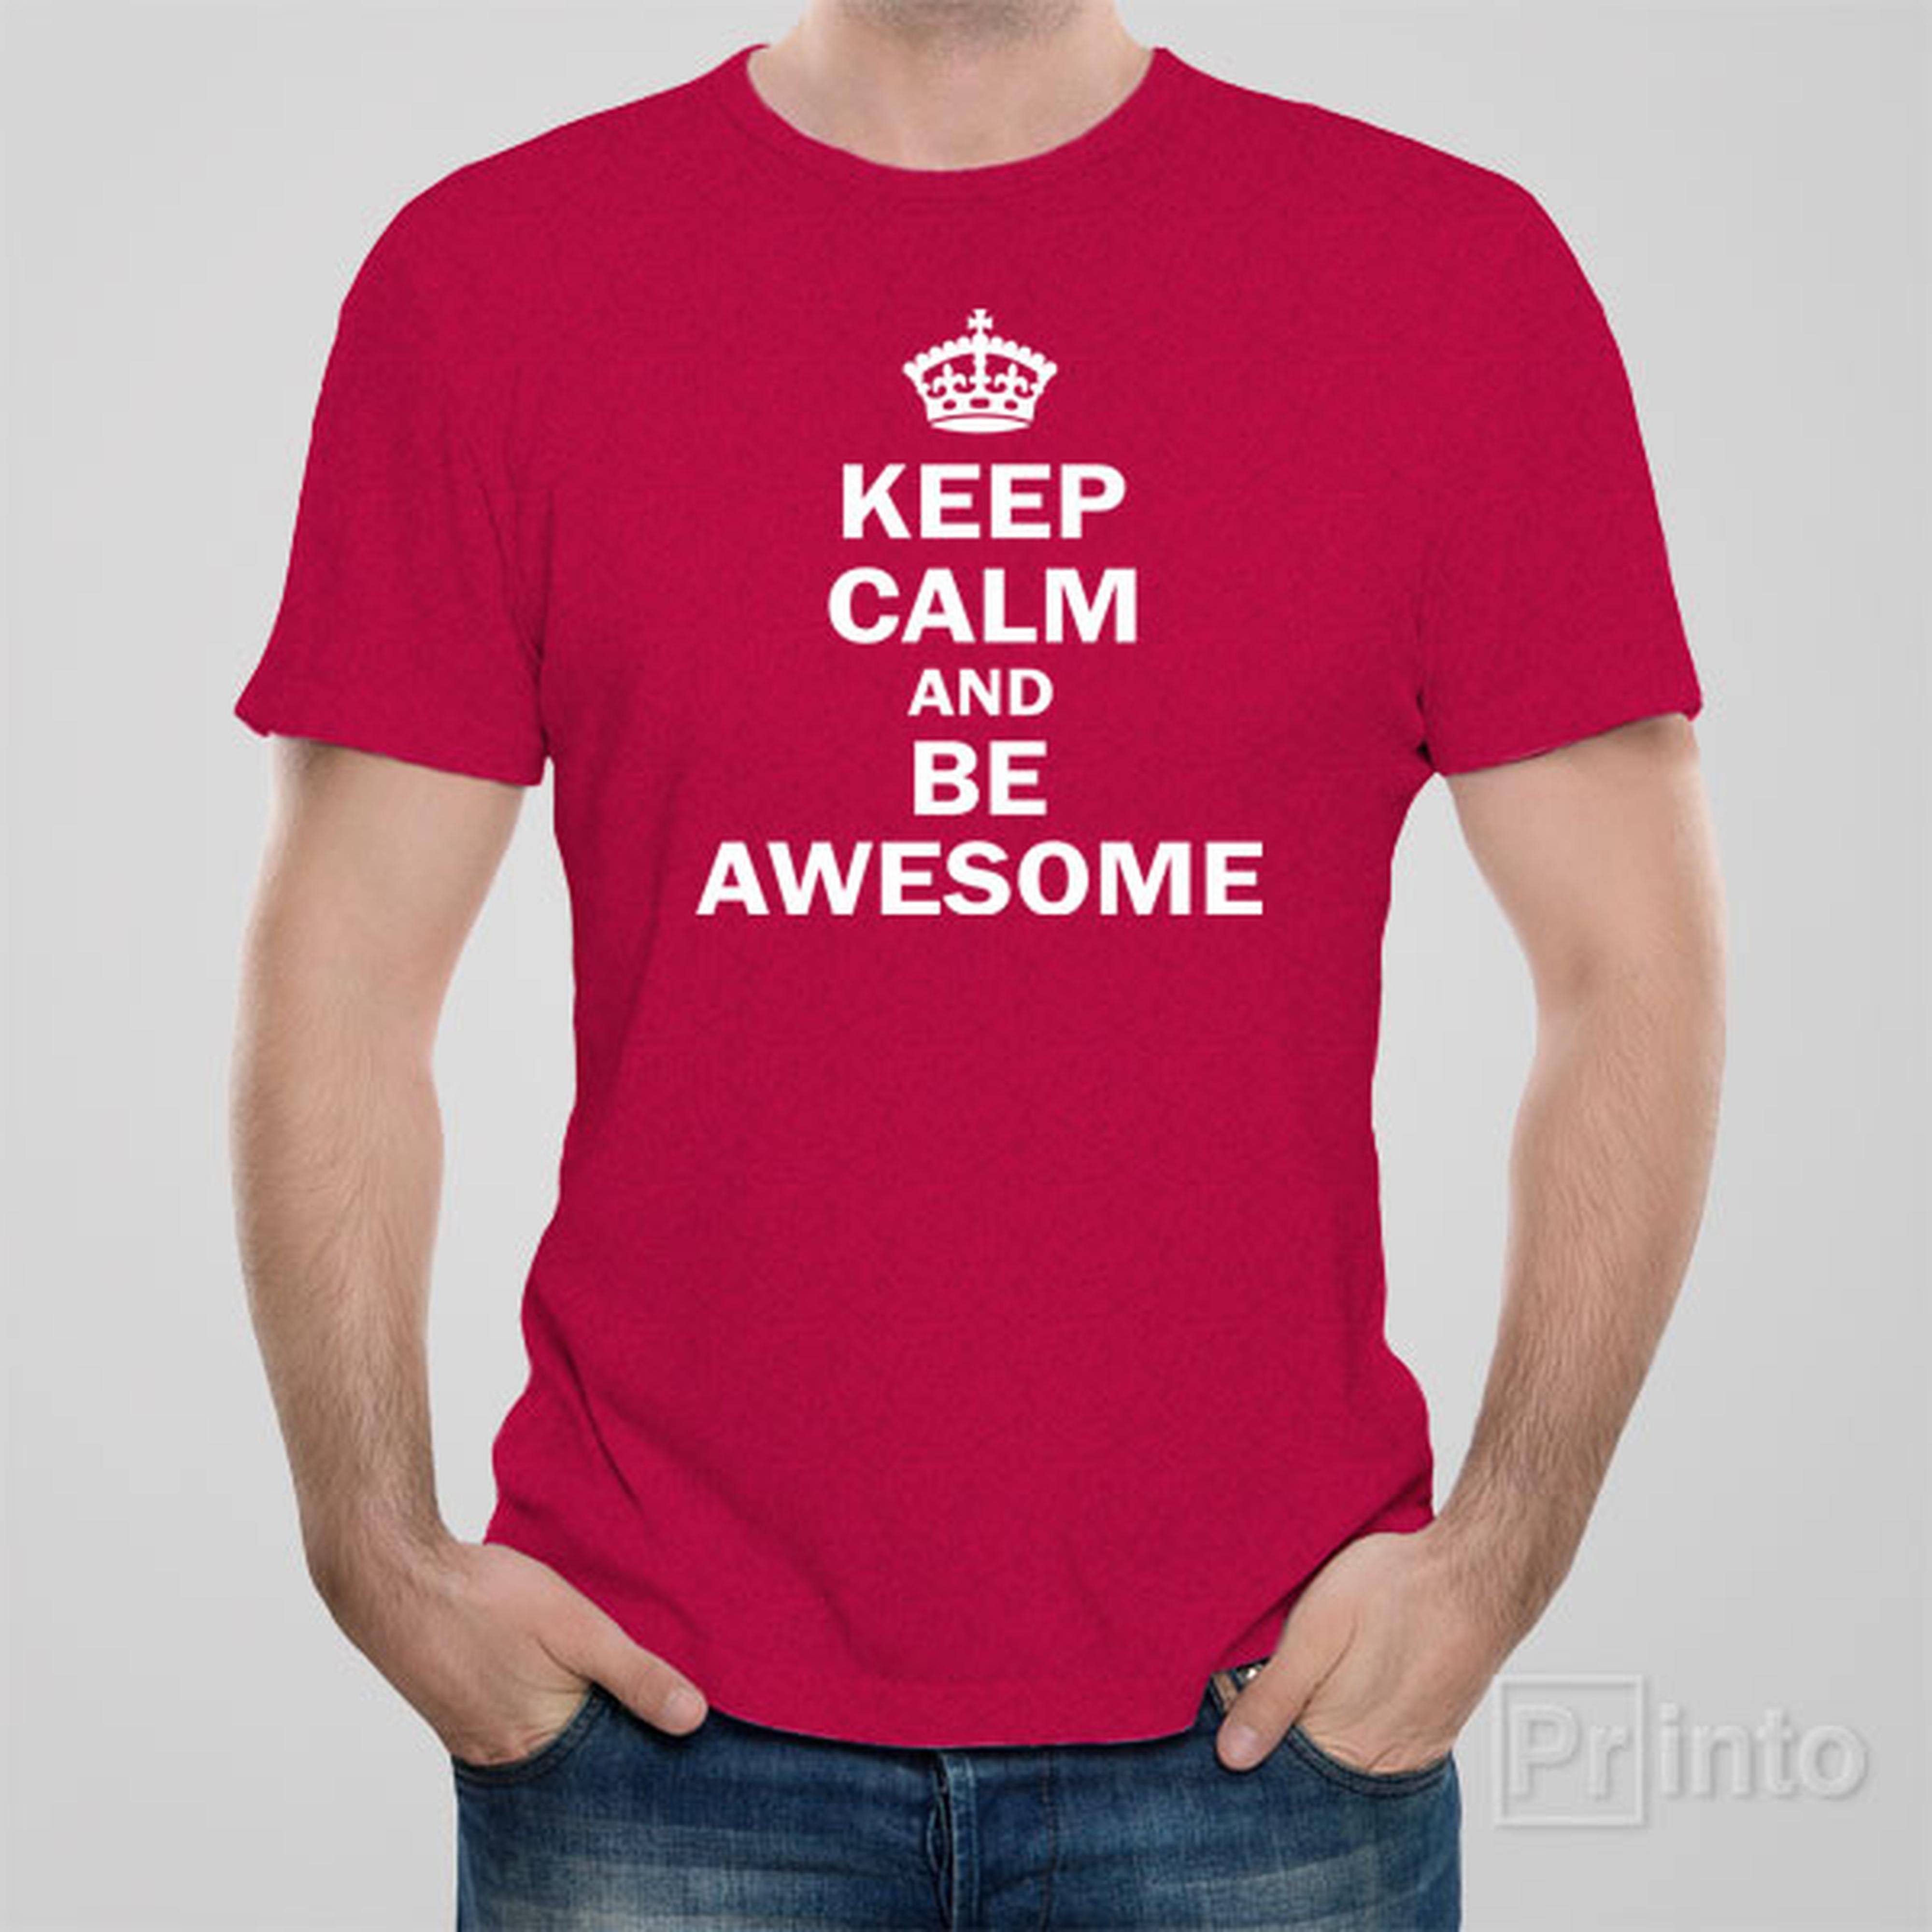 keep-calm-and-be-awesome-t-shirt